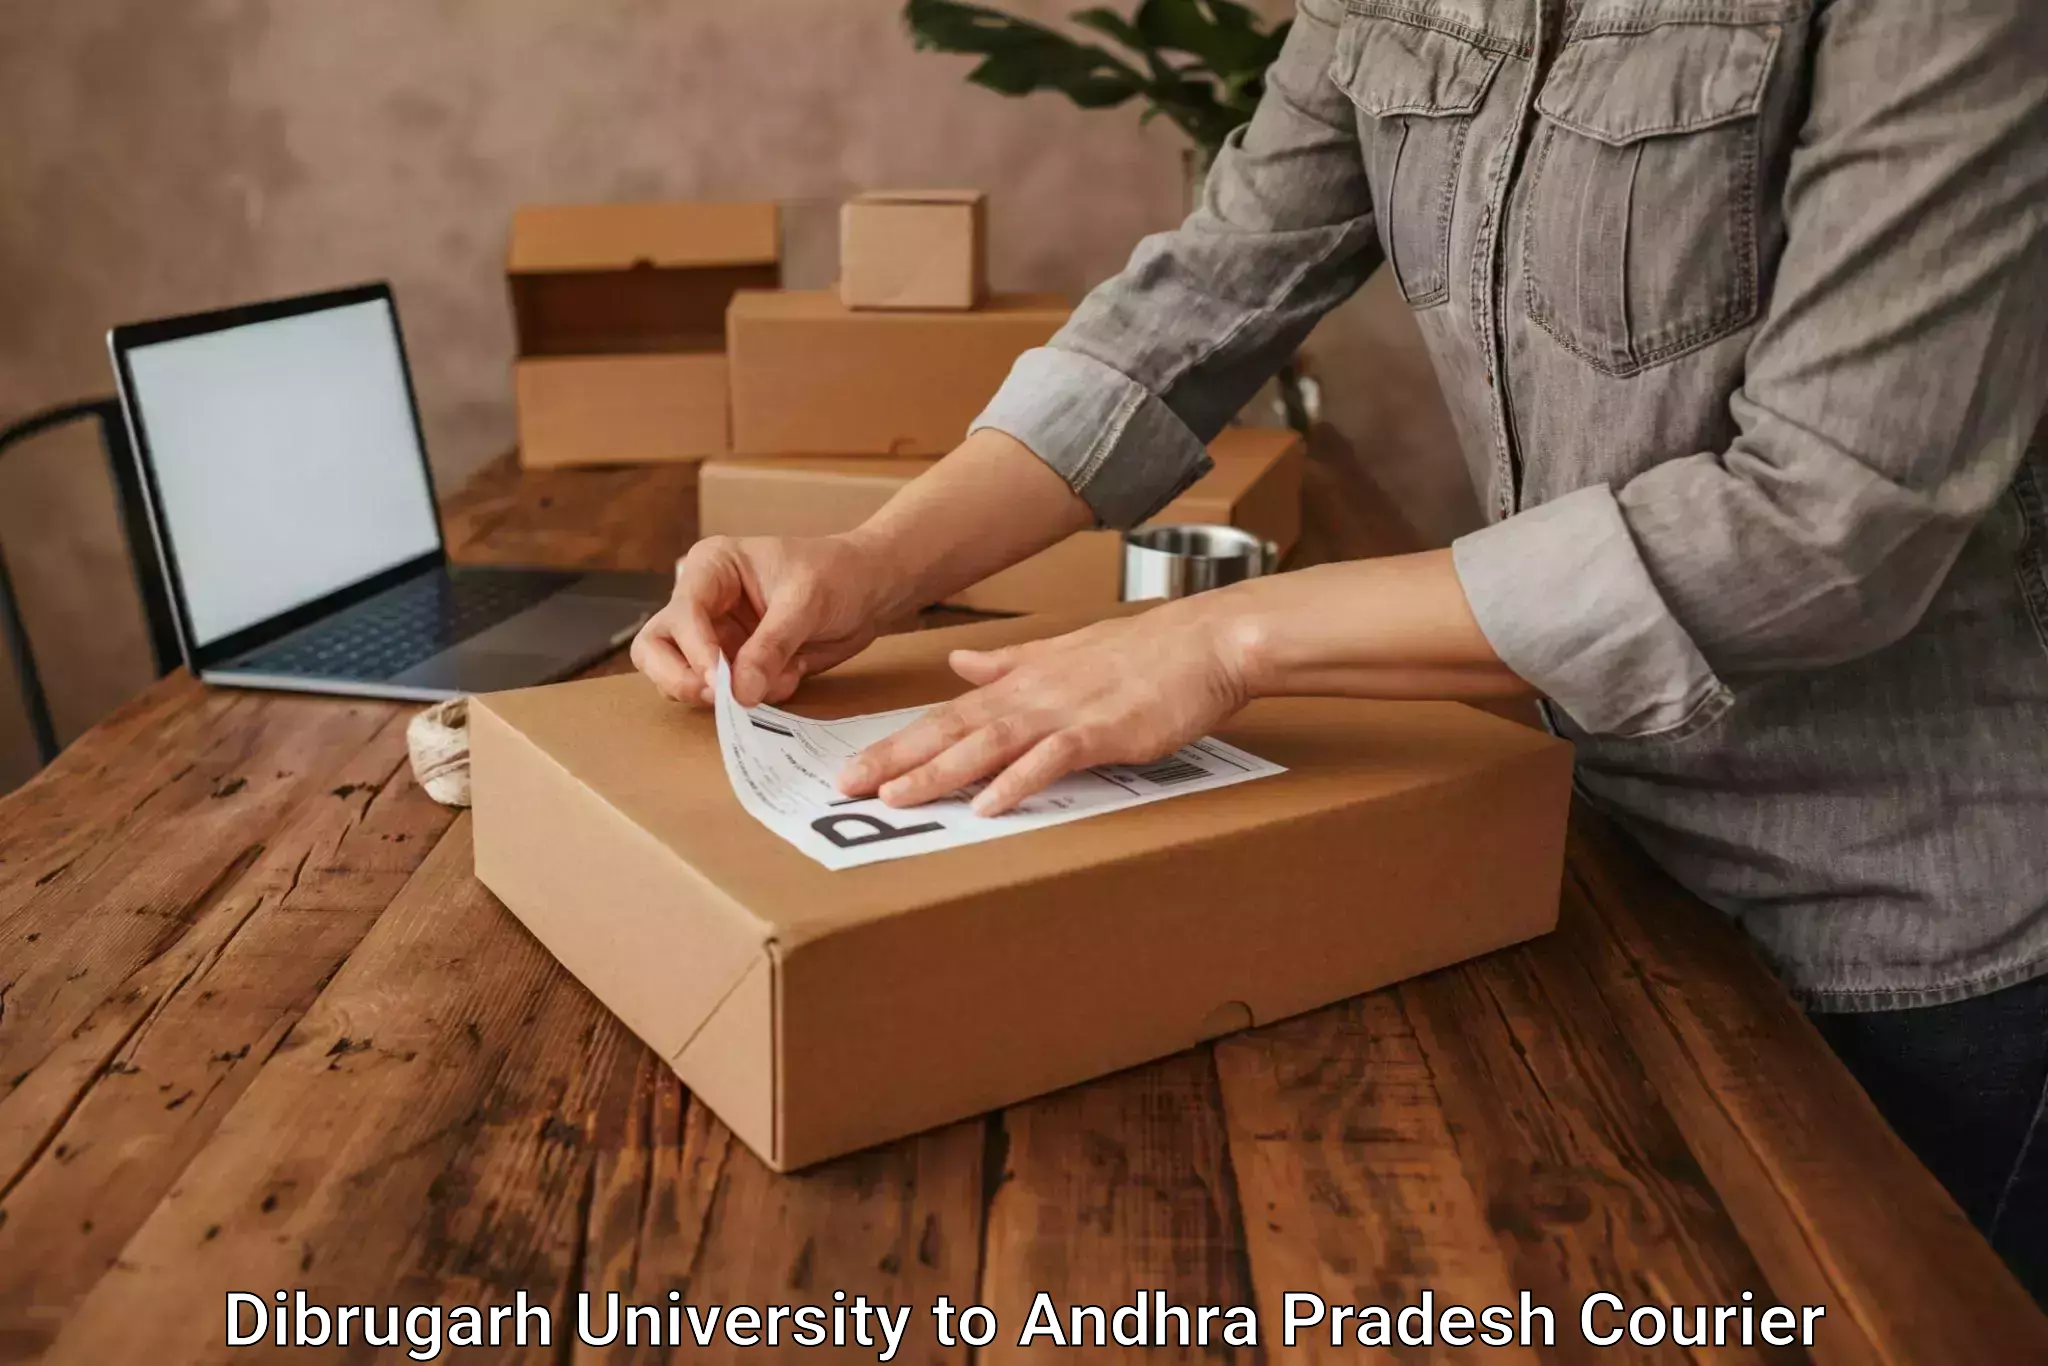 Courier service efficiency in Dibrugarh University to Tripuranthakam